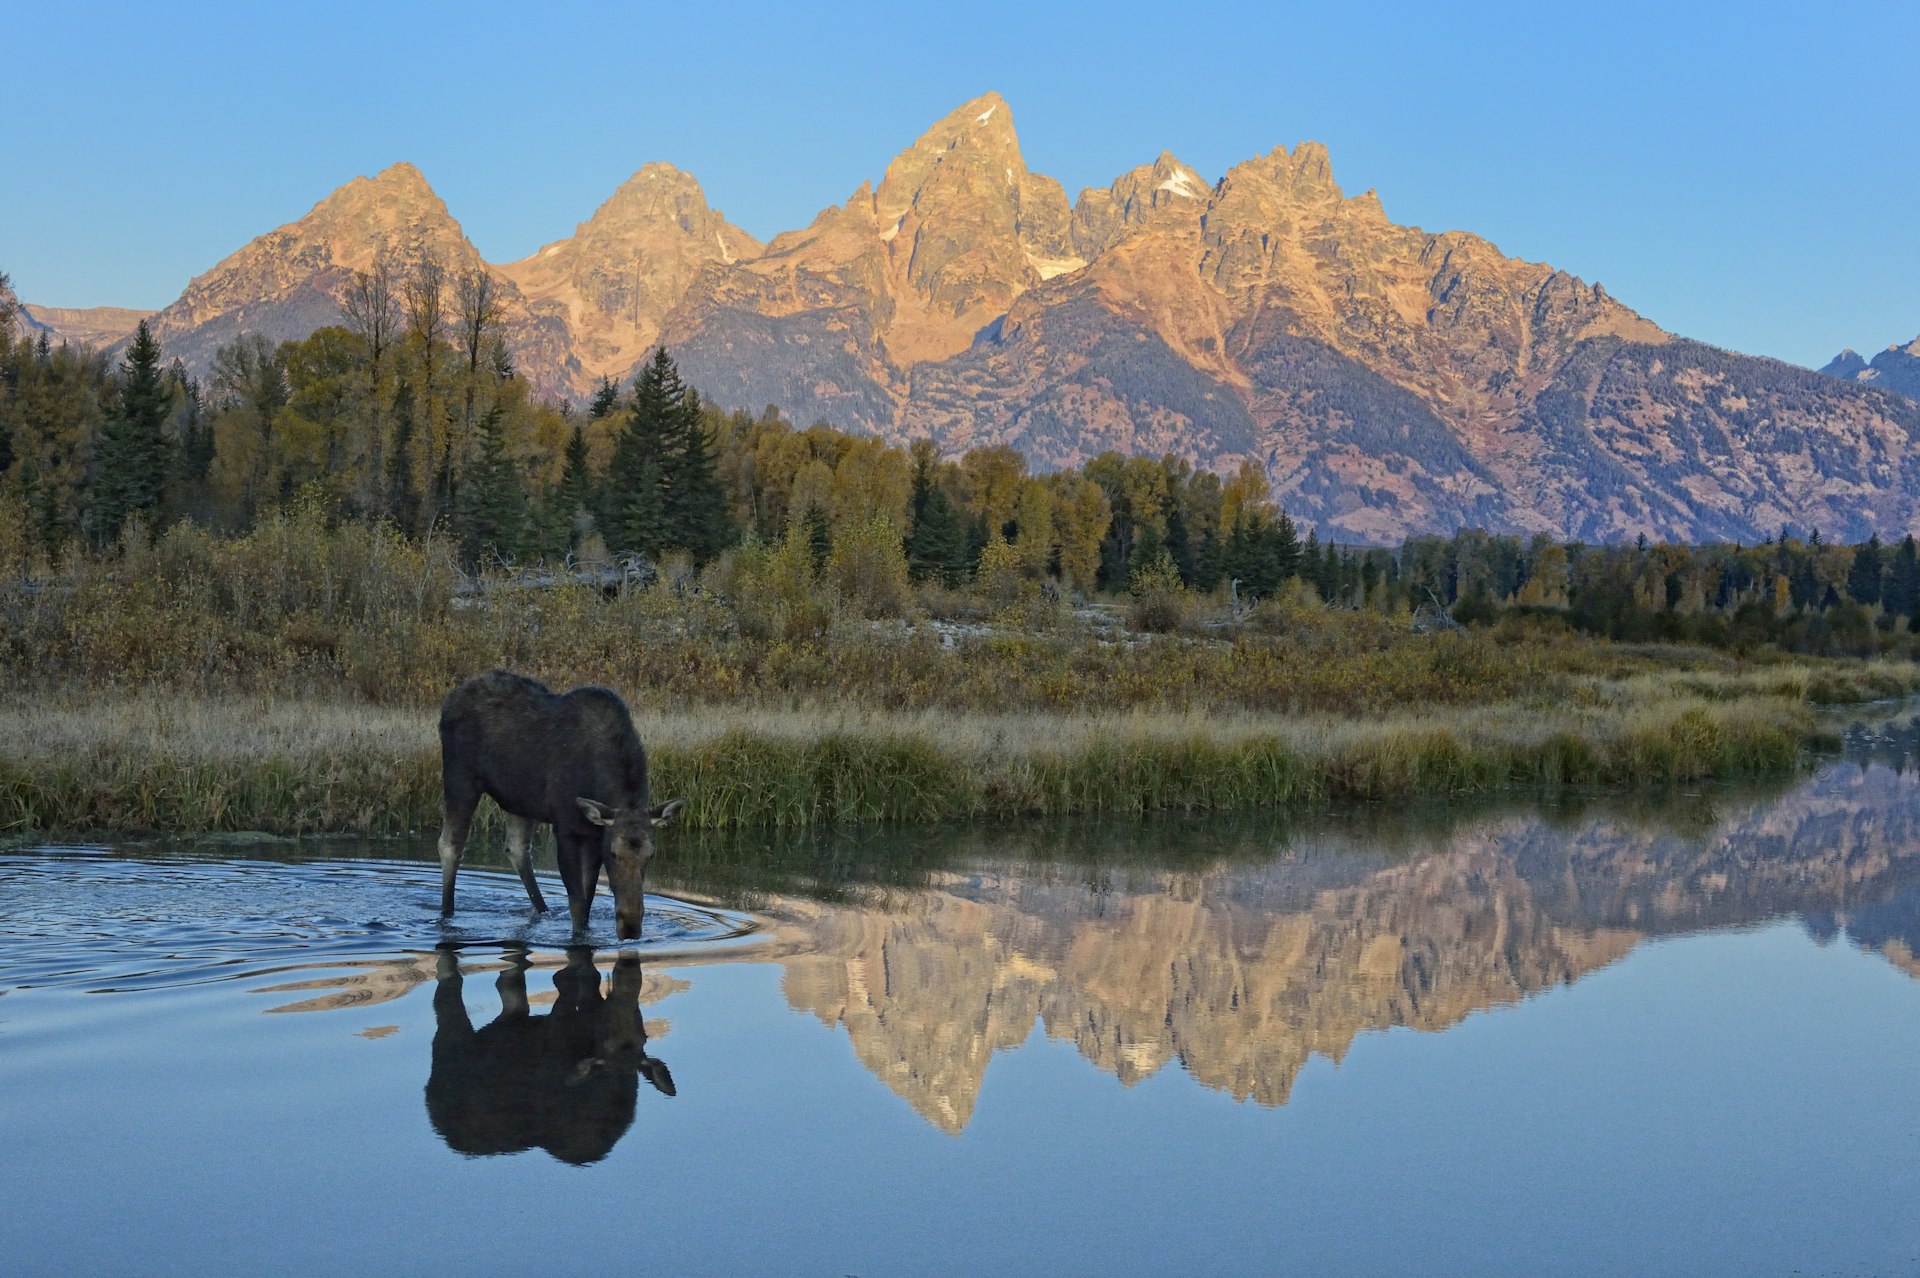 A moose drinking from a waterway as the sun reflects of mountains in the distance